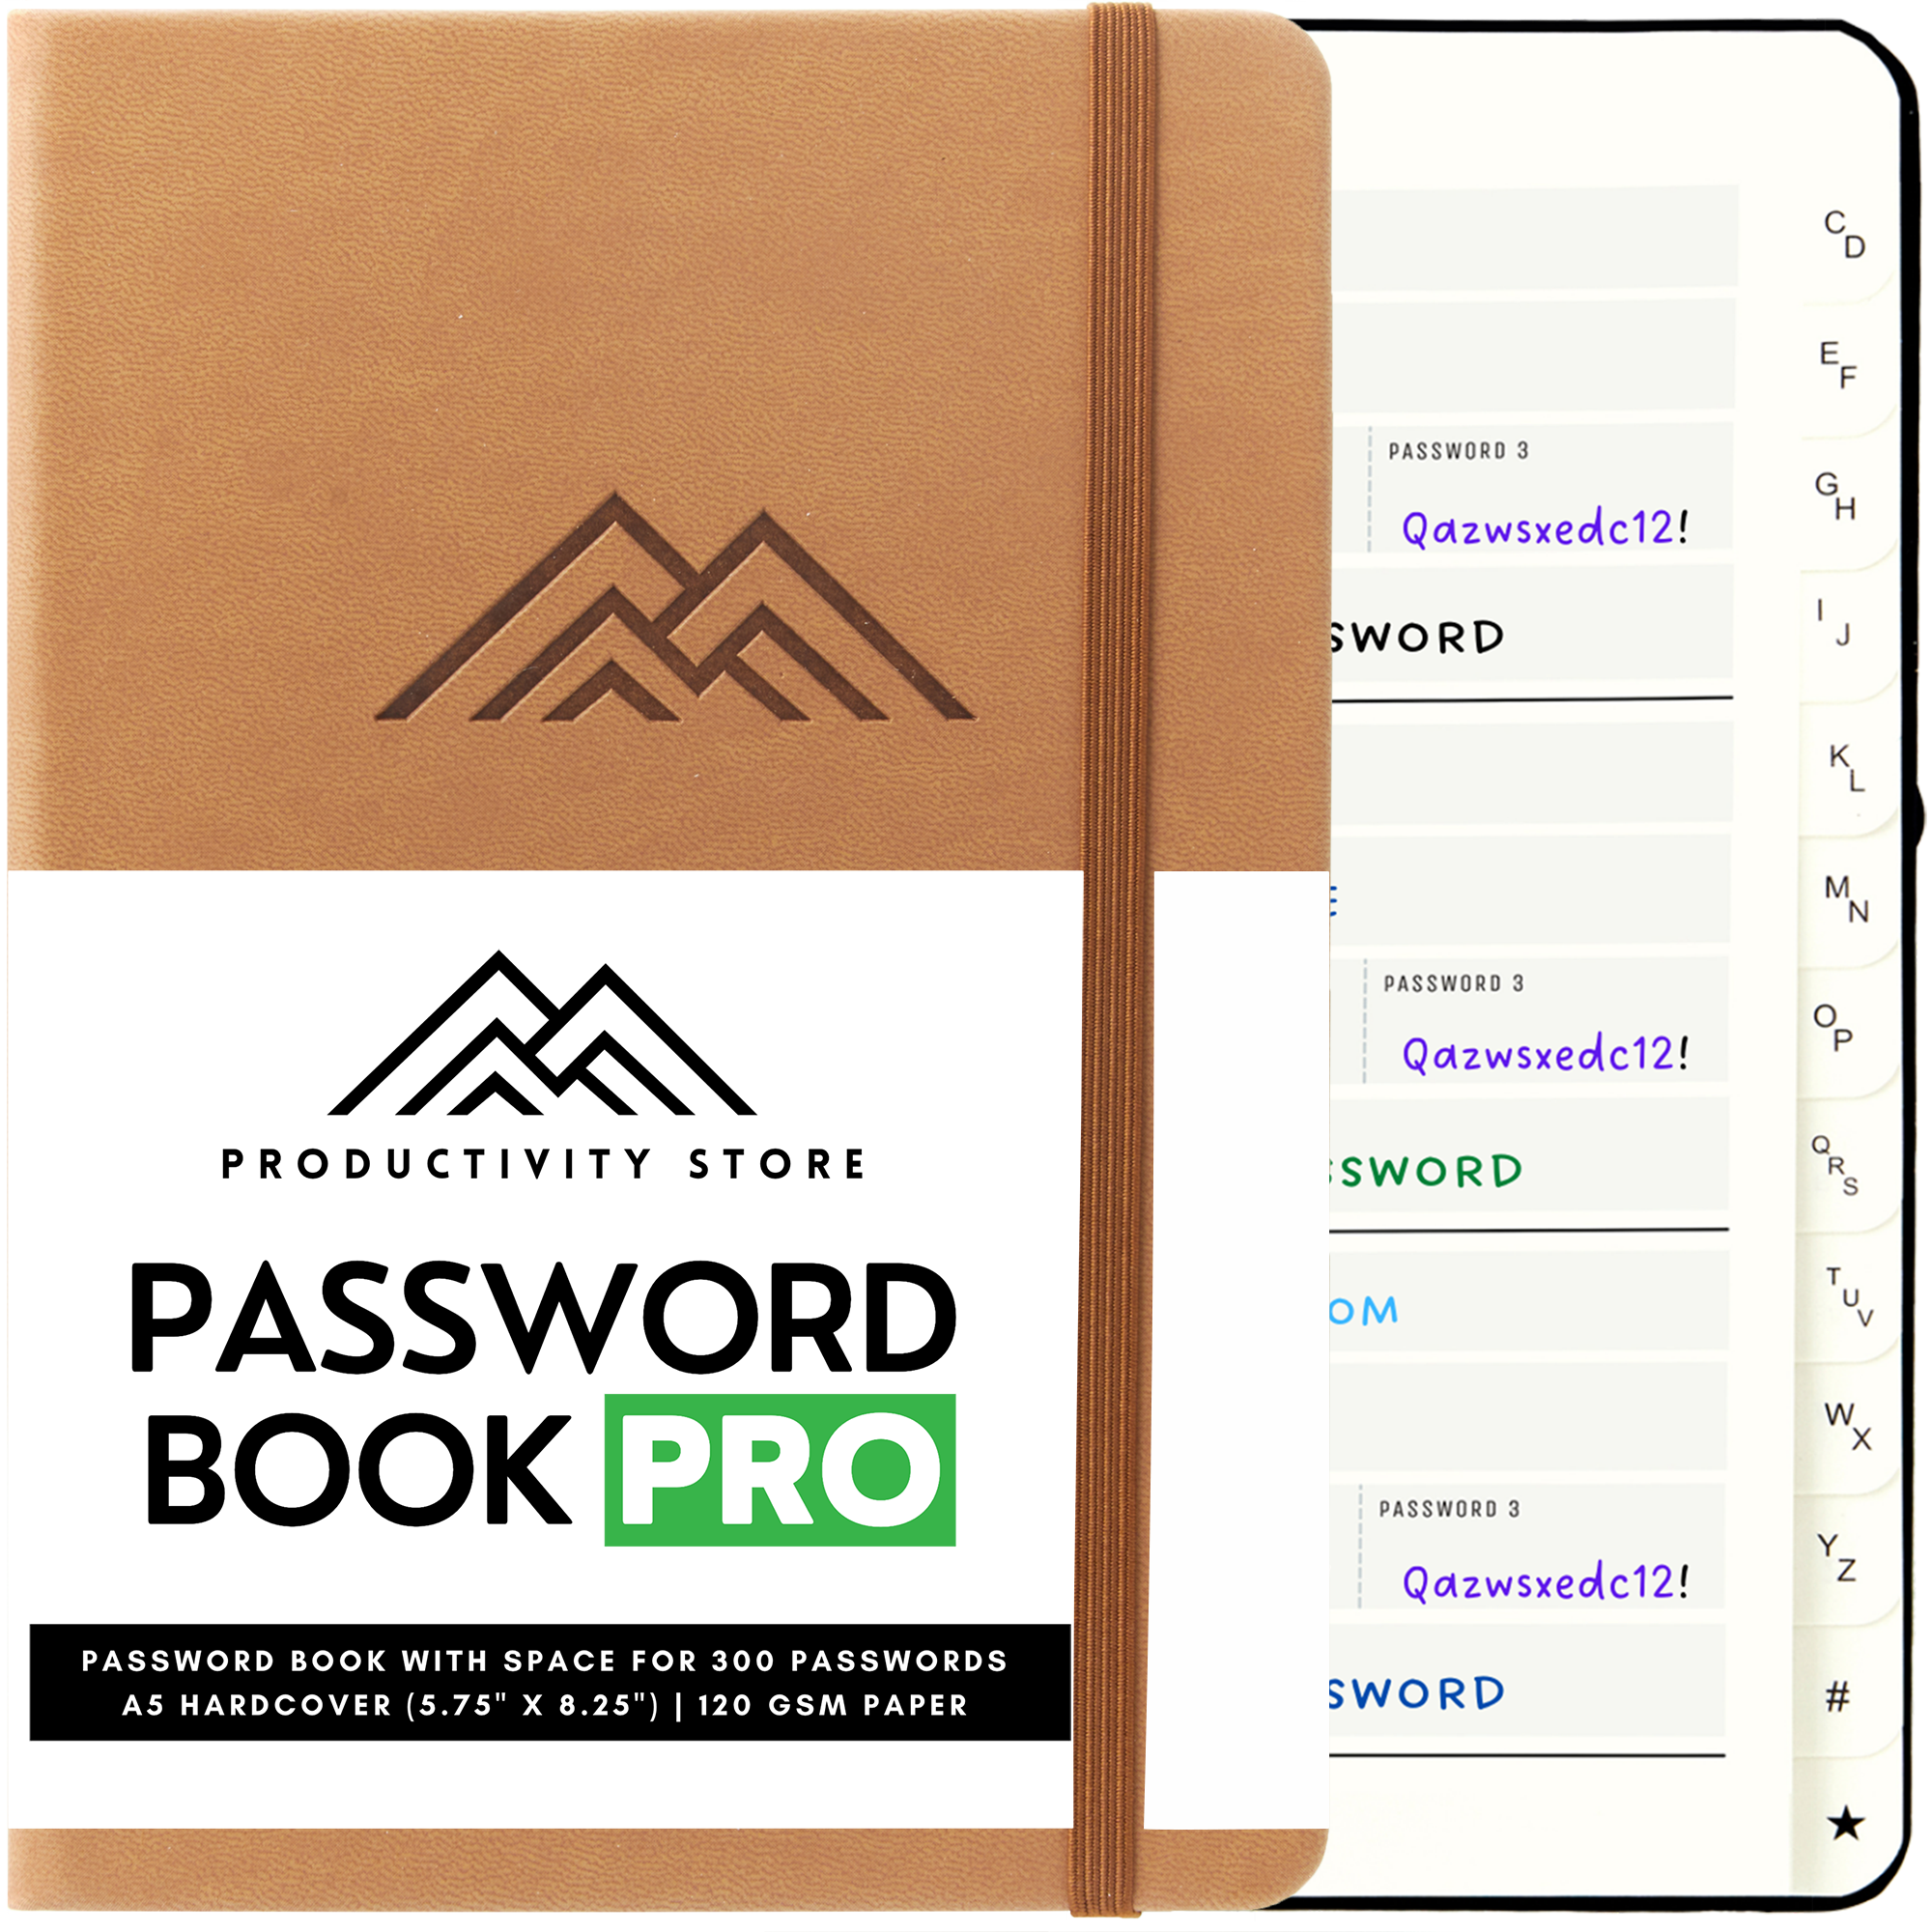 Simplify Your Life: The Benefits of a Password Keeper Book